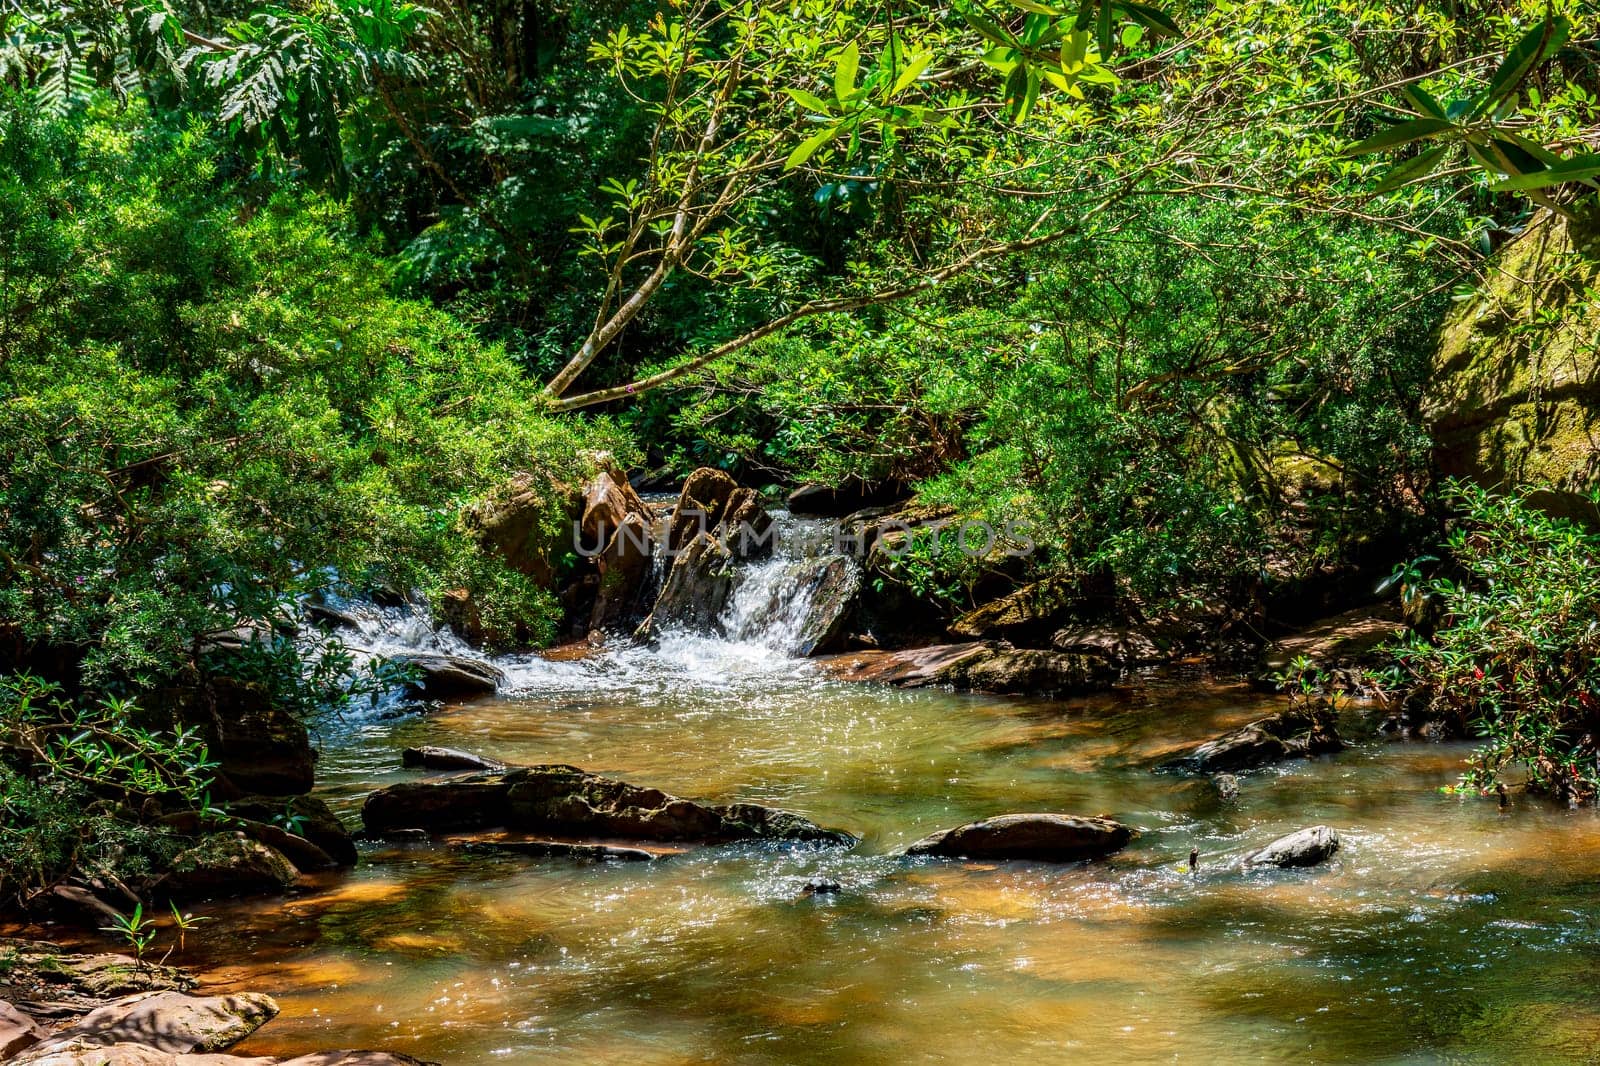 Small river running through the forest among the rocks and vegetation in the state of Minas Gerais, Brazil